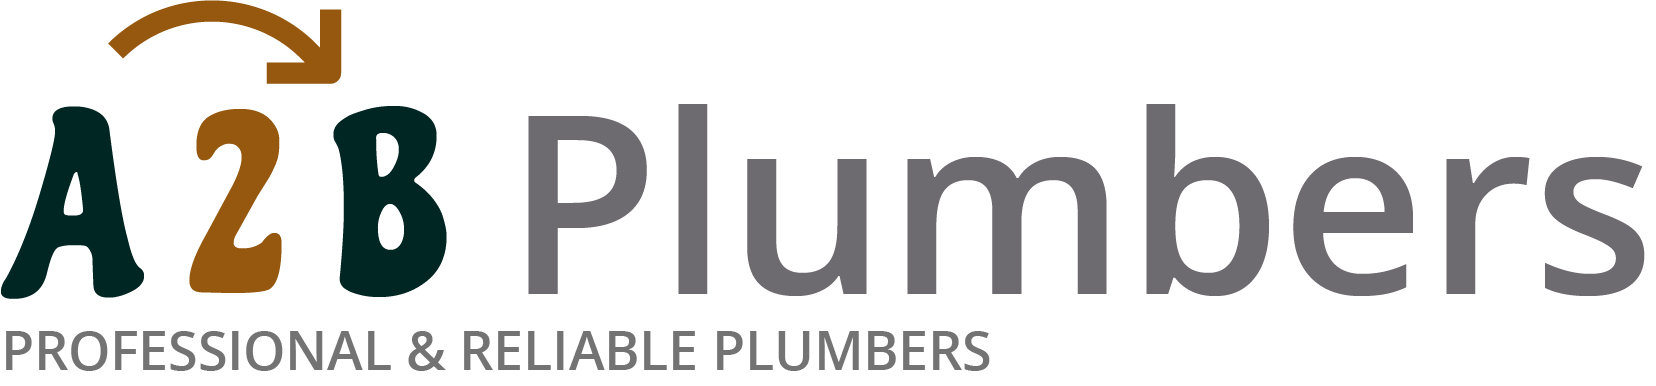 If you need a boiler installed, a radiator repaired or a leaking tap fixed, call us now - we provide services for properties in Penzance and the local area.